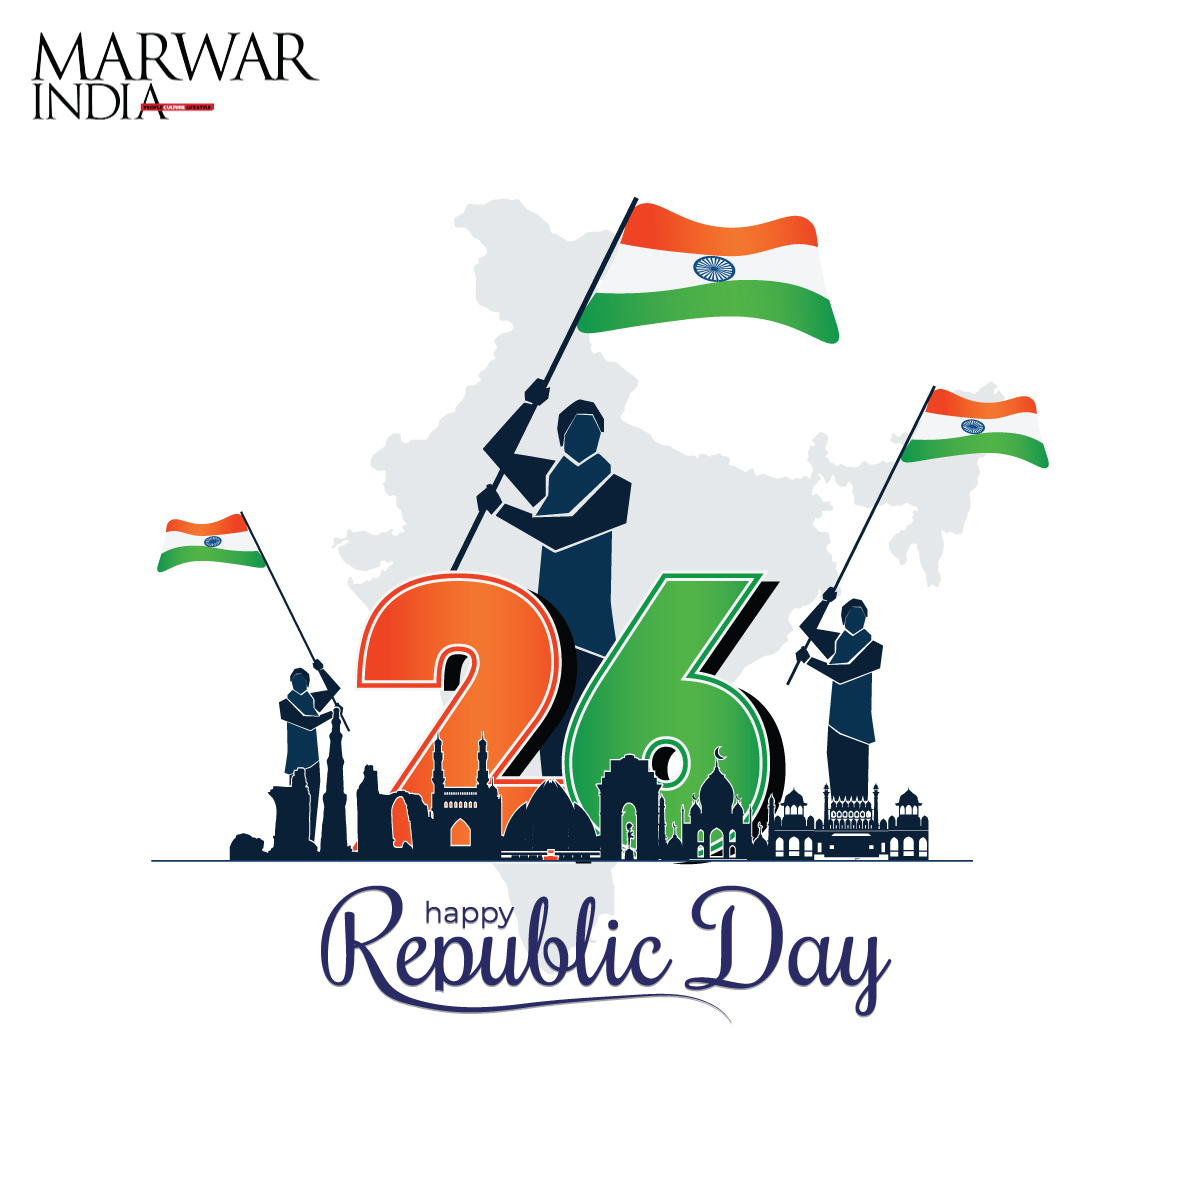 Wishing our readers a very Happy 75th Republic Day! Let's celebrate the freedom and unity of India. 🇮🇳

#RepublicDay2024 #HappyRepublicDay #75thRepublicDay #FreedomAndUnity #IndiaCelebrates #JaiHind #ProudIndian